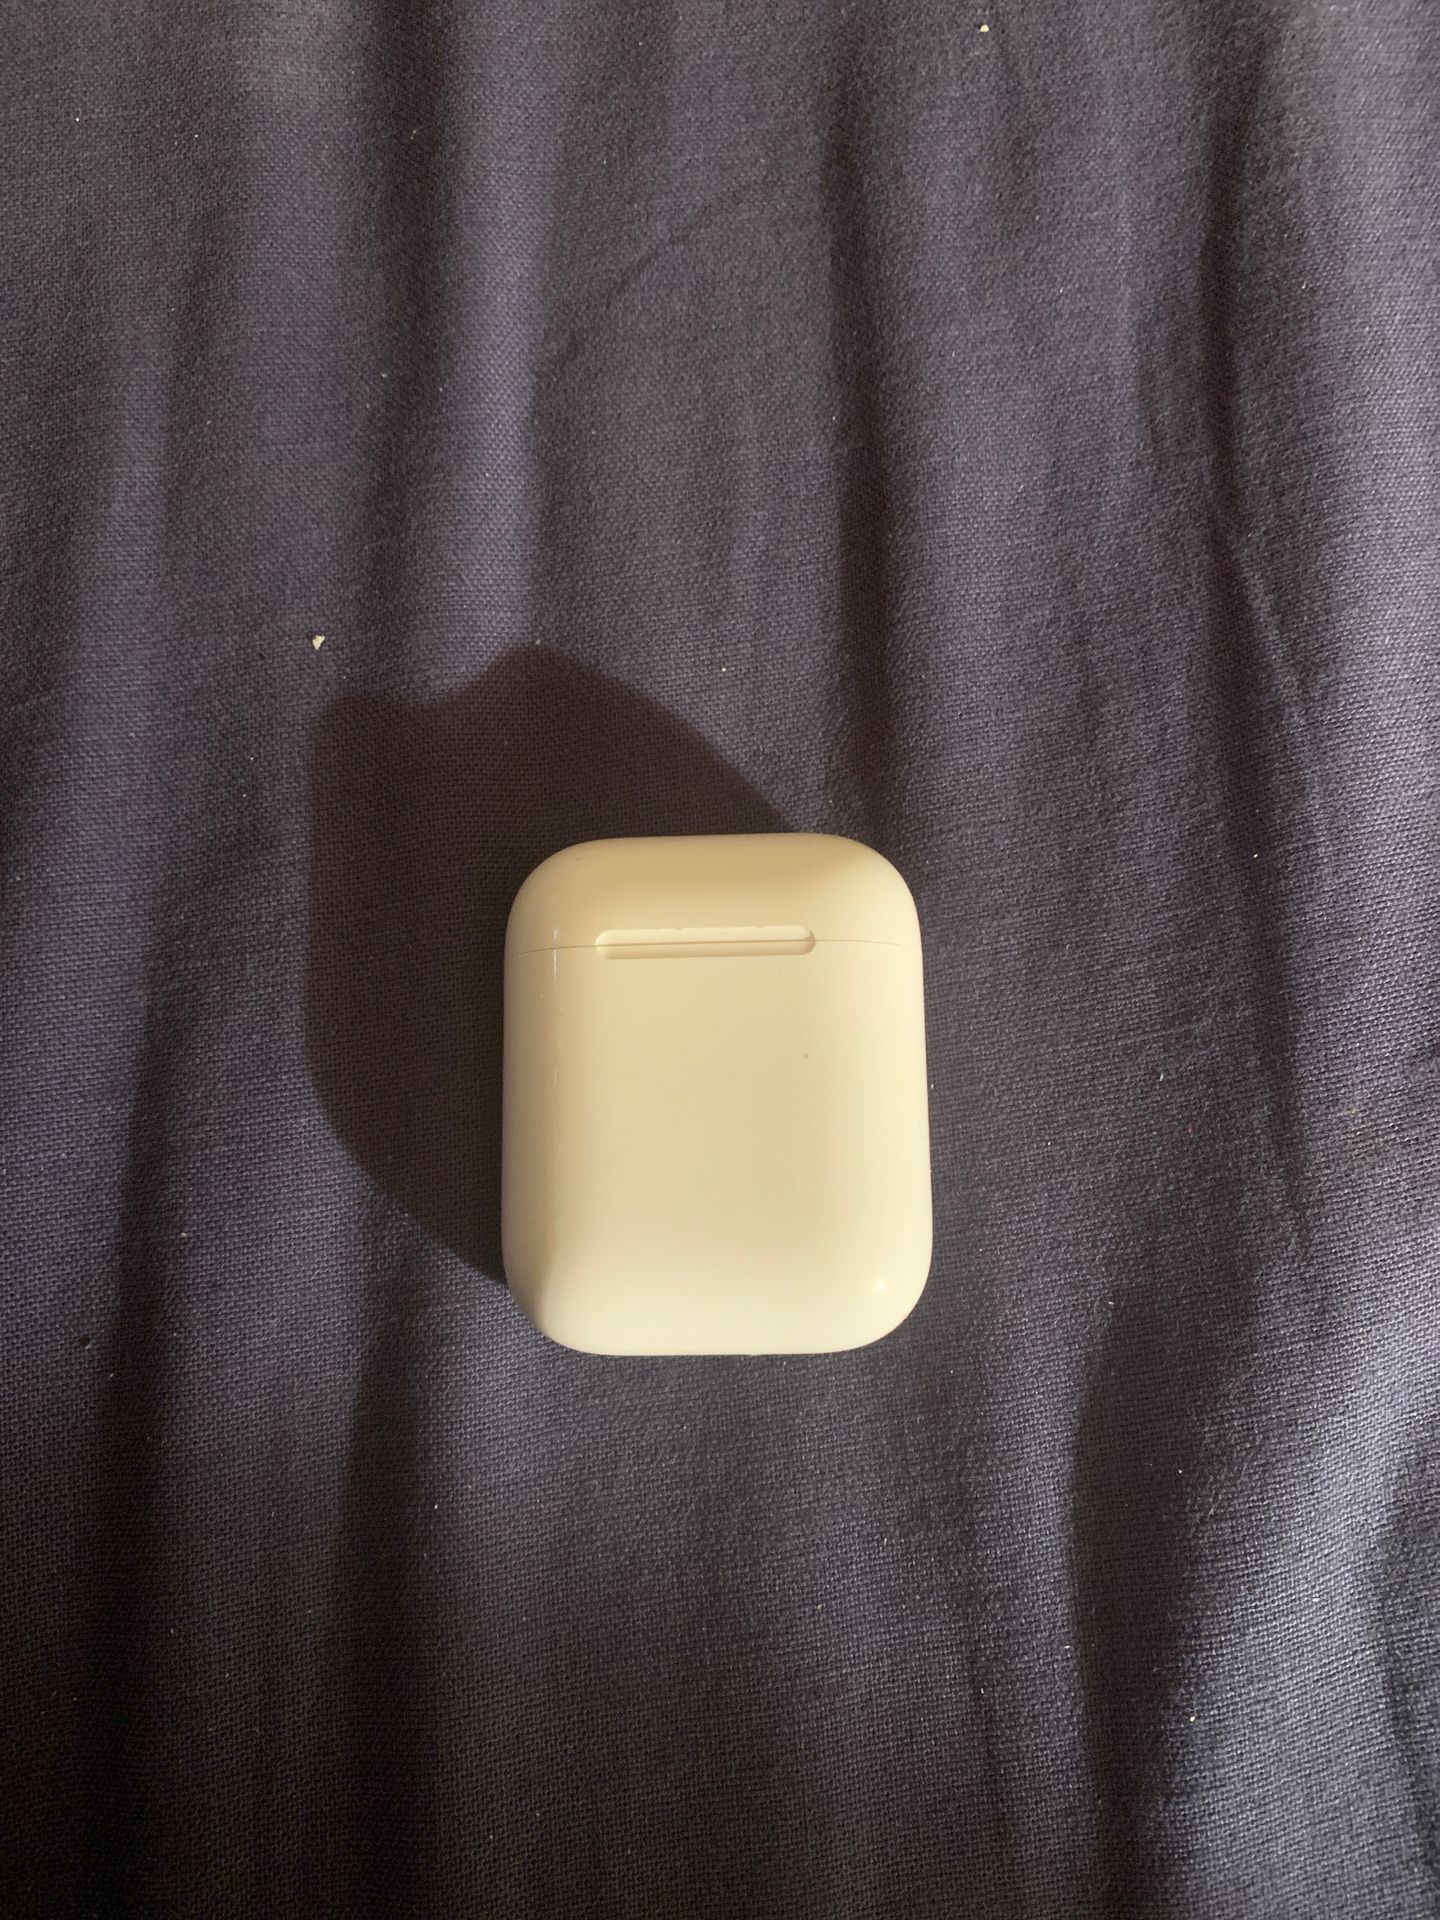 1st generation air pods